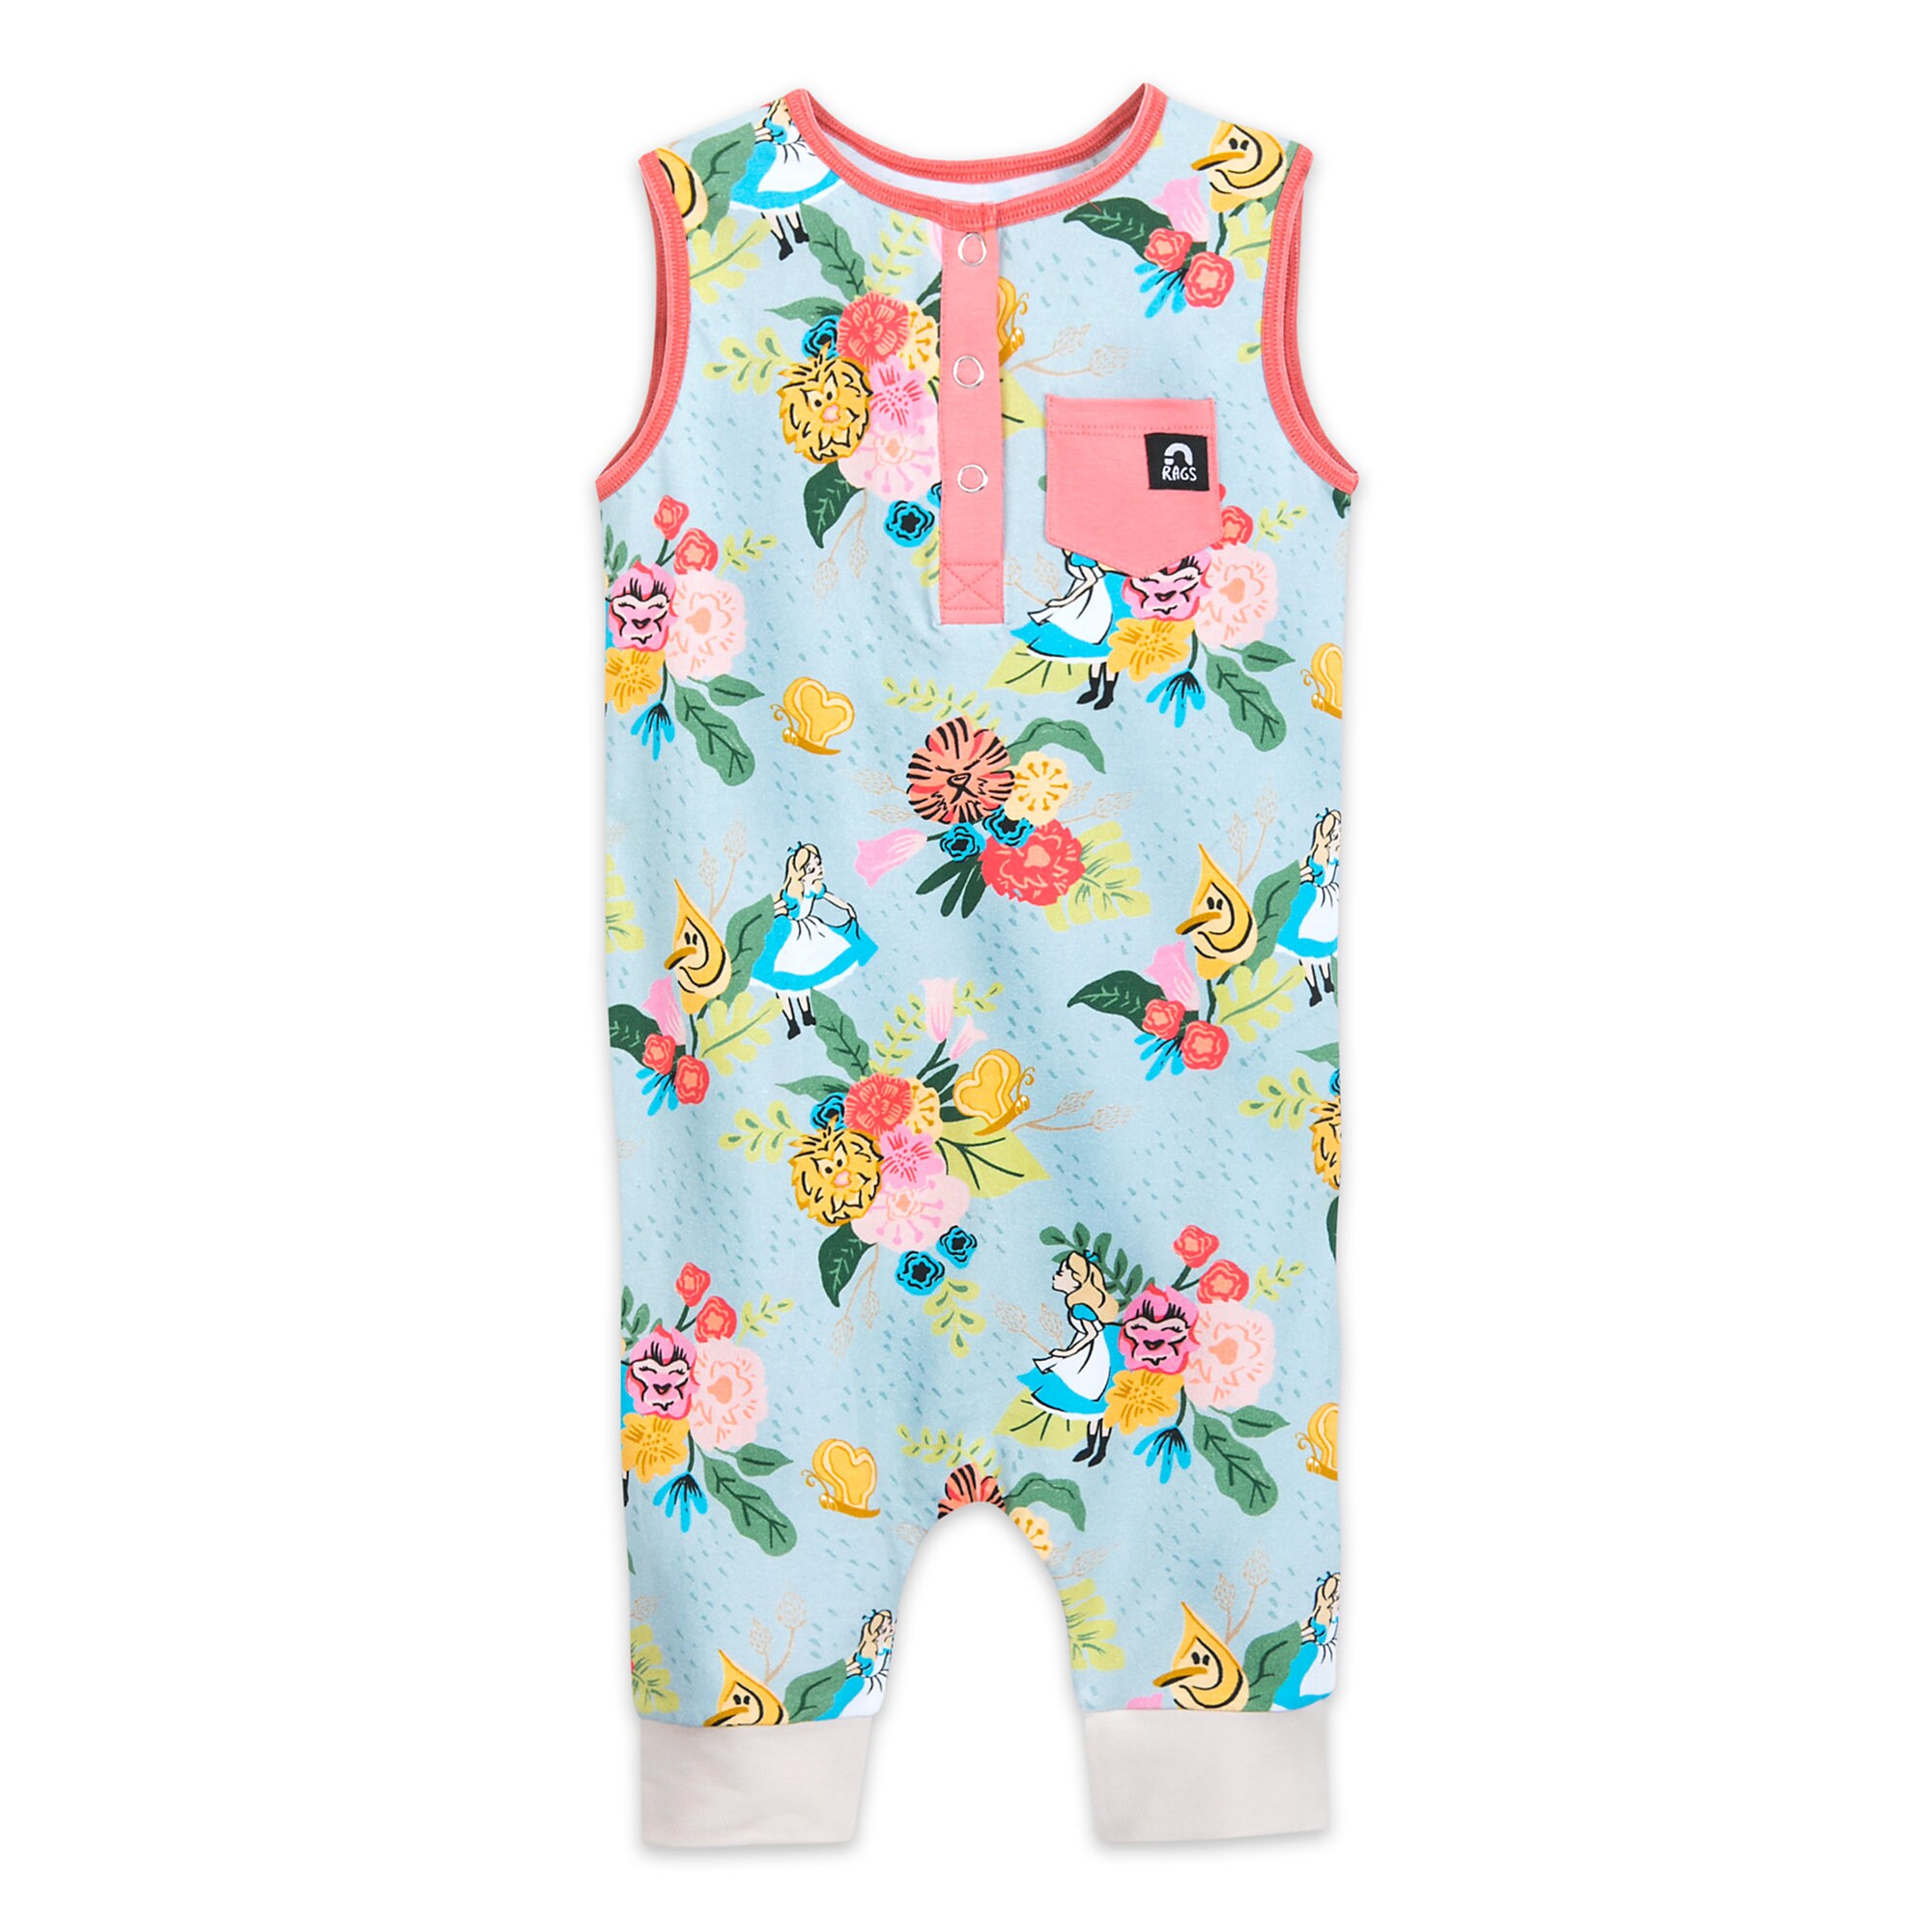 Alice in Wonderland Tank Romper for Baby and Toddler by RAGS